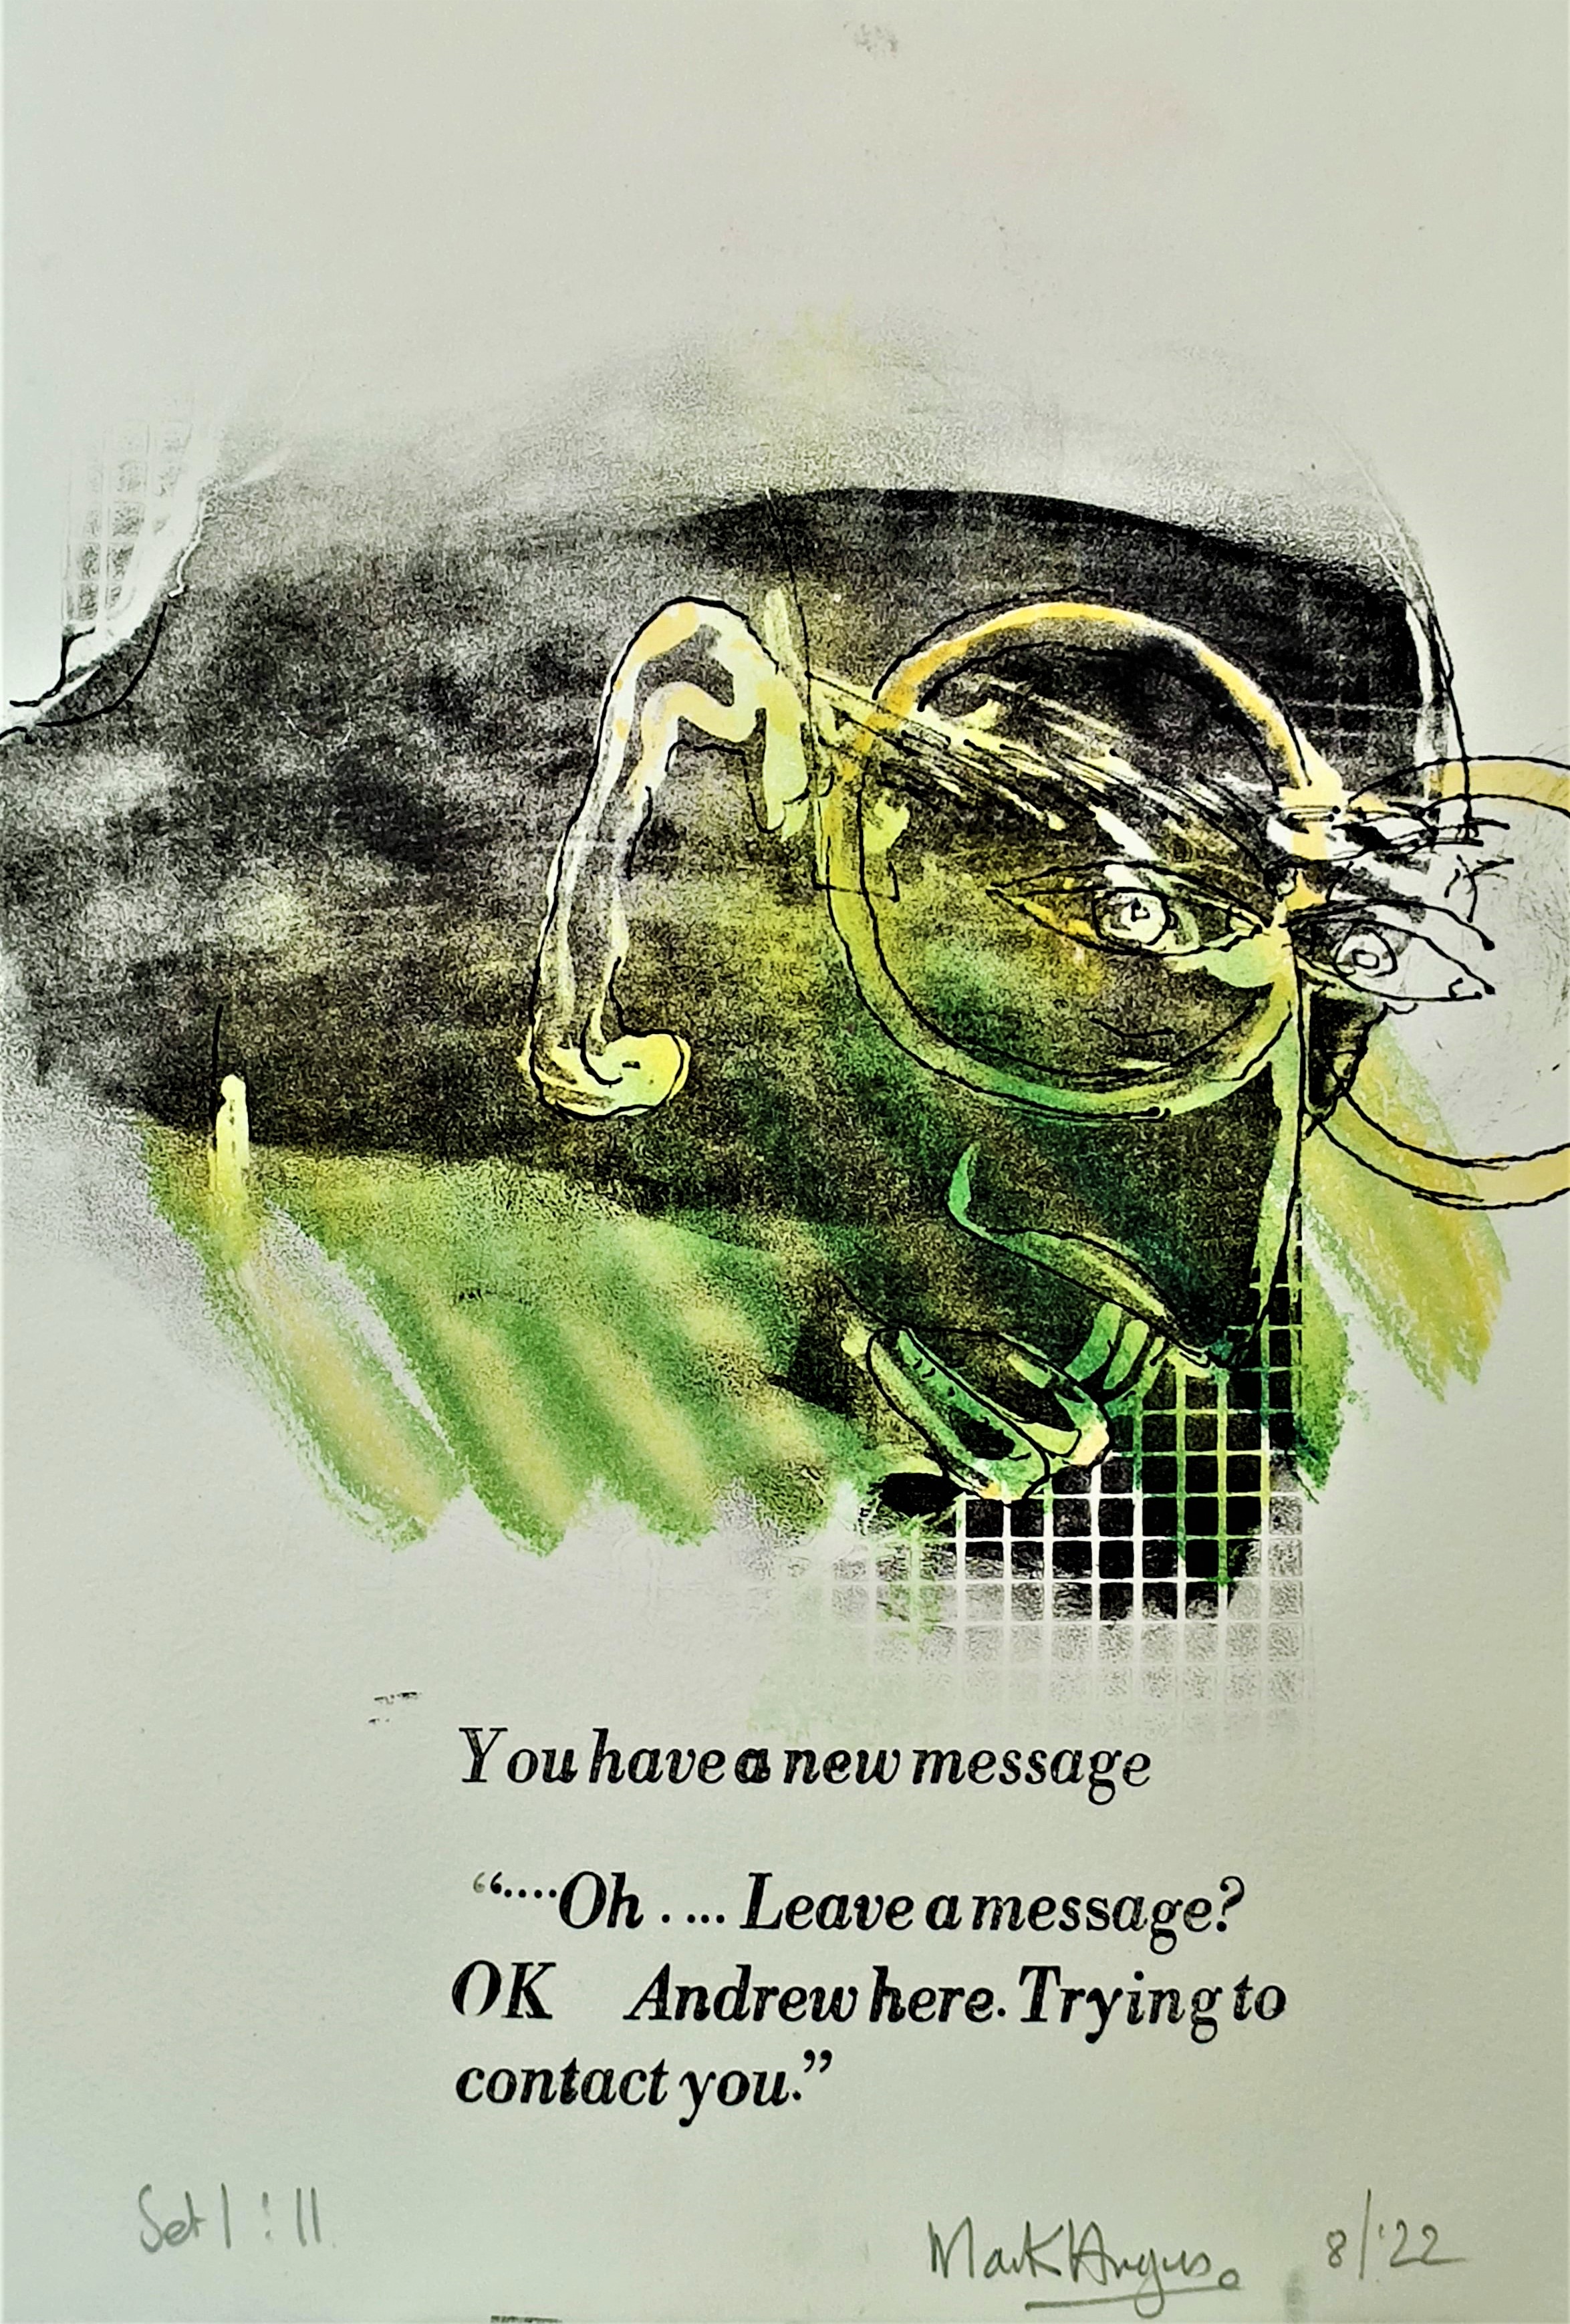 You have a new message Set 1 - 11 Vitreography and text